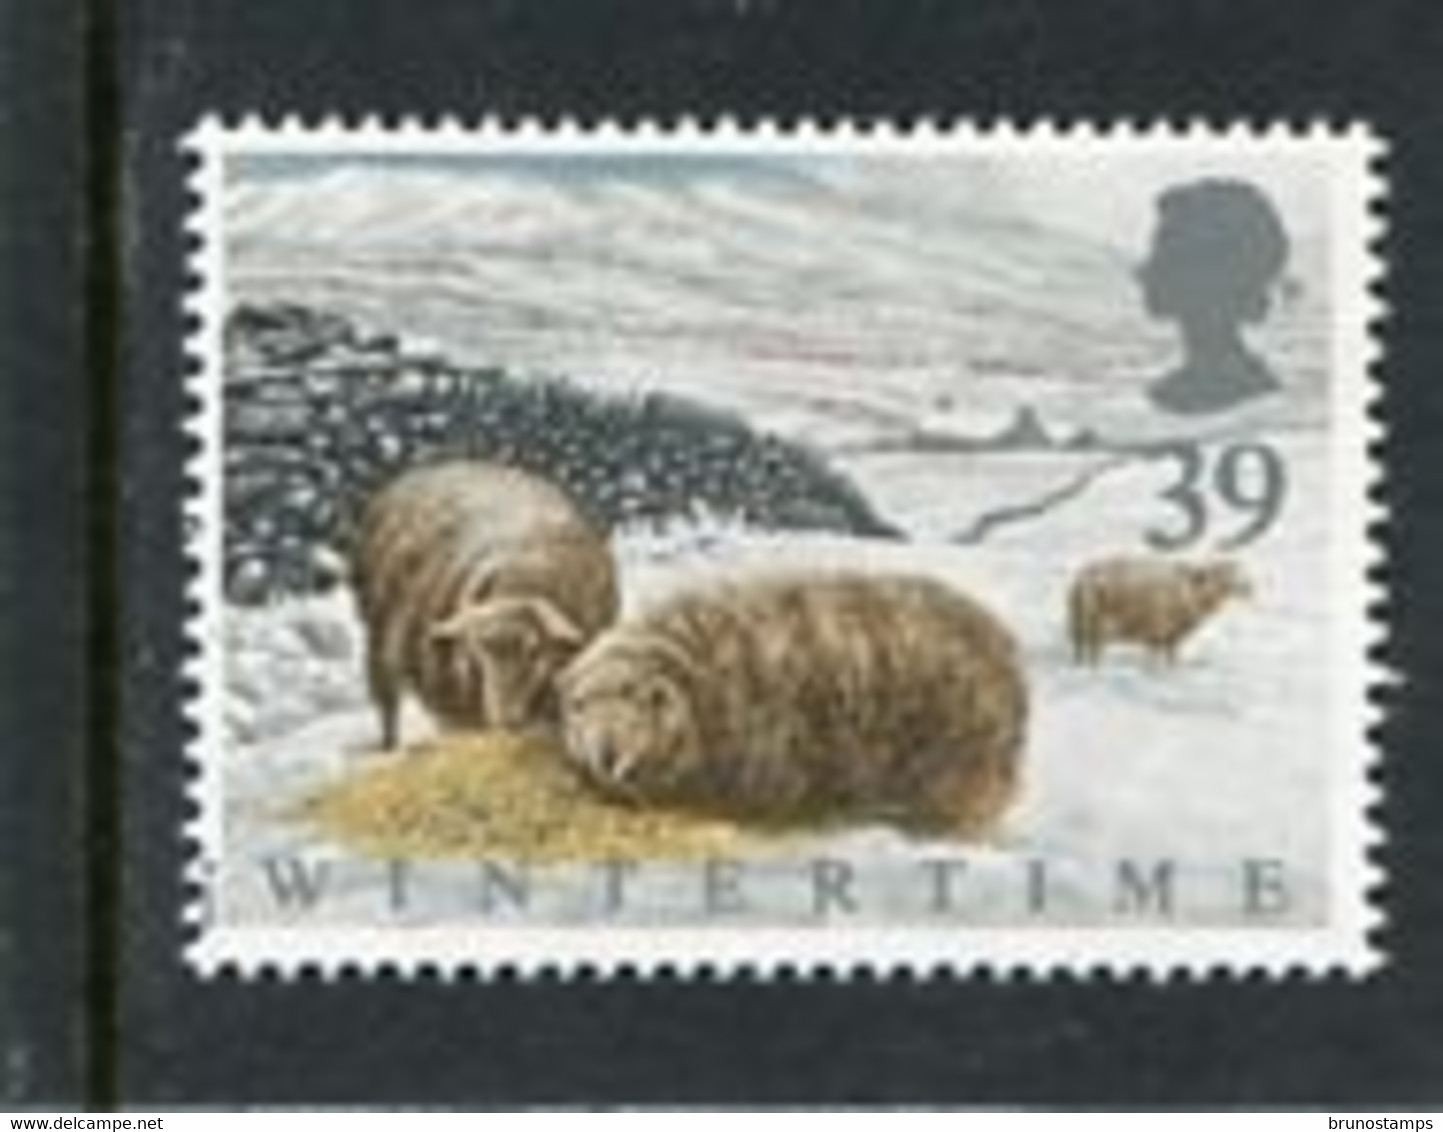 GREAT BRITAIN - 1992  39p  WINTER  MINT NH - Unclassified